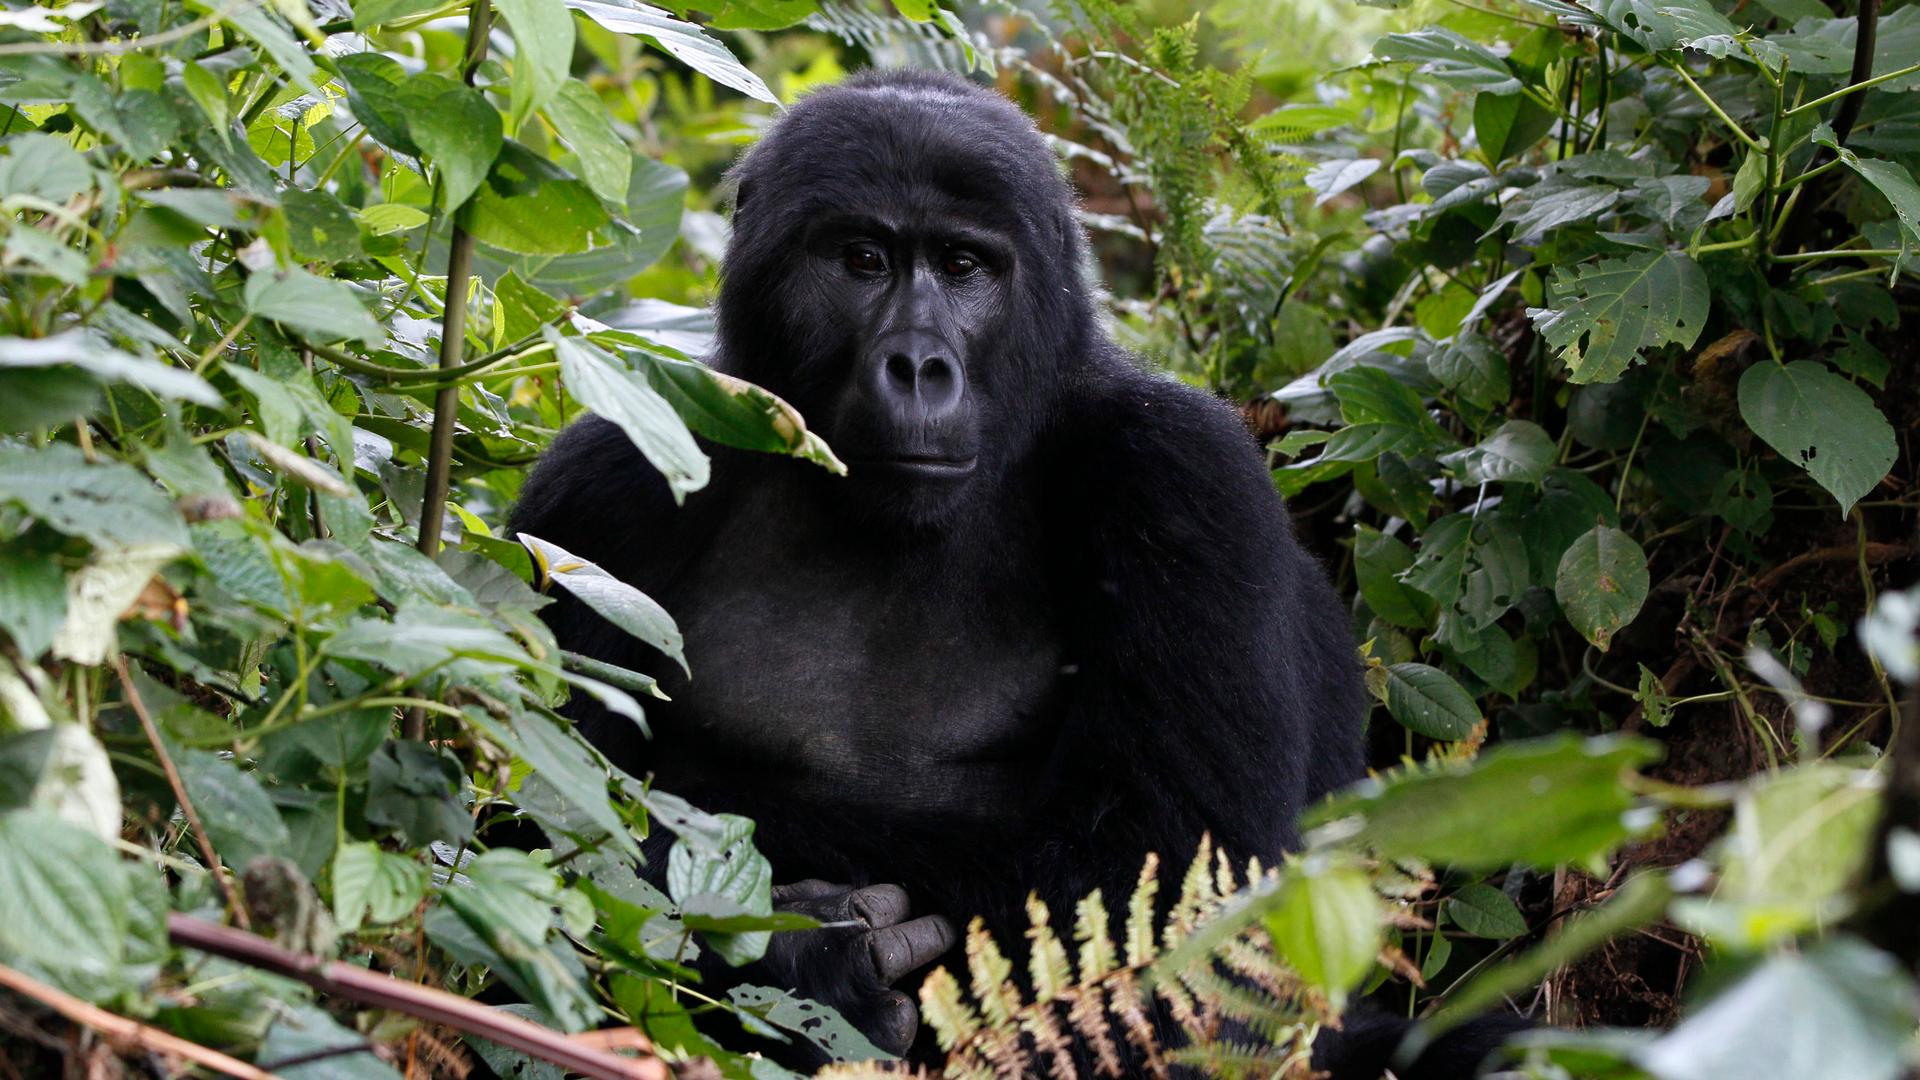 An endangered mountain gorilla rests inside a forest in a Bwindi Impenetrable National Park in Rwanada. 